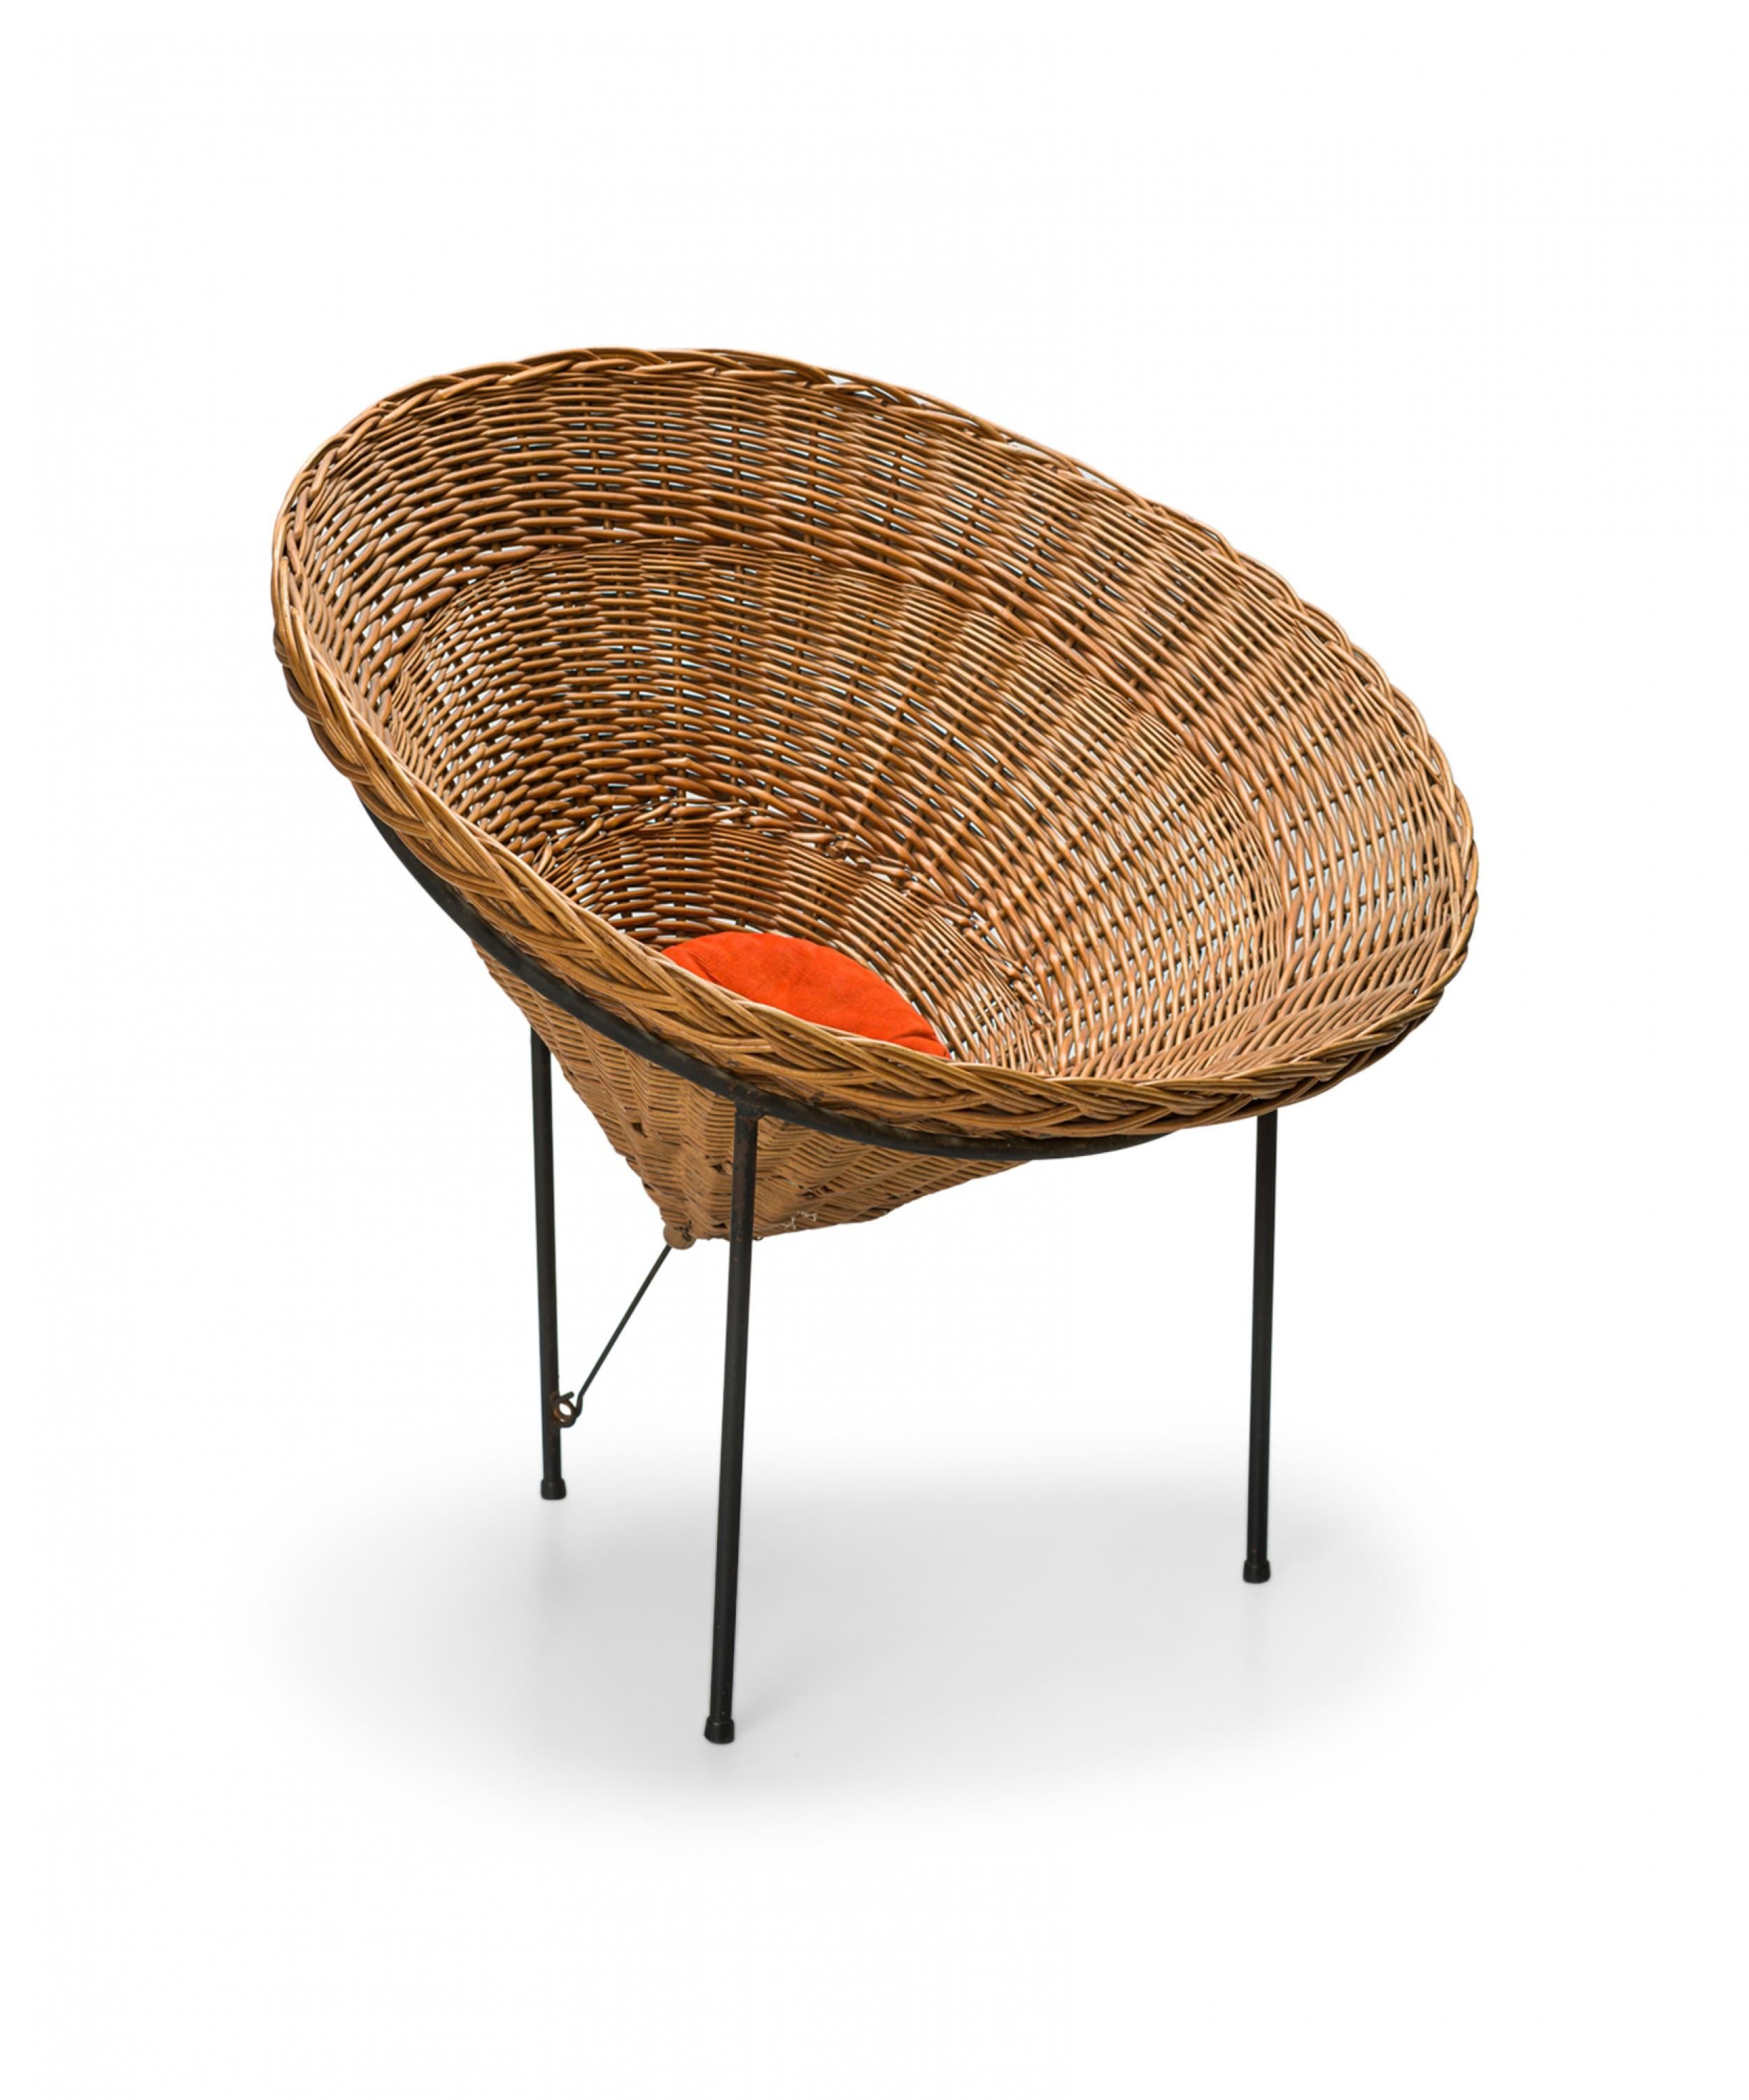 Italian mid-century basket chair with a conical form, supported by three iron legs with a small orange cushion.